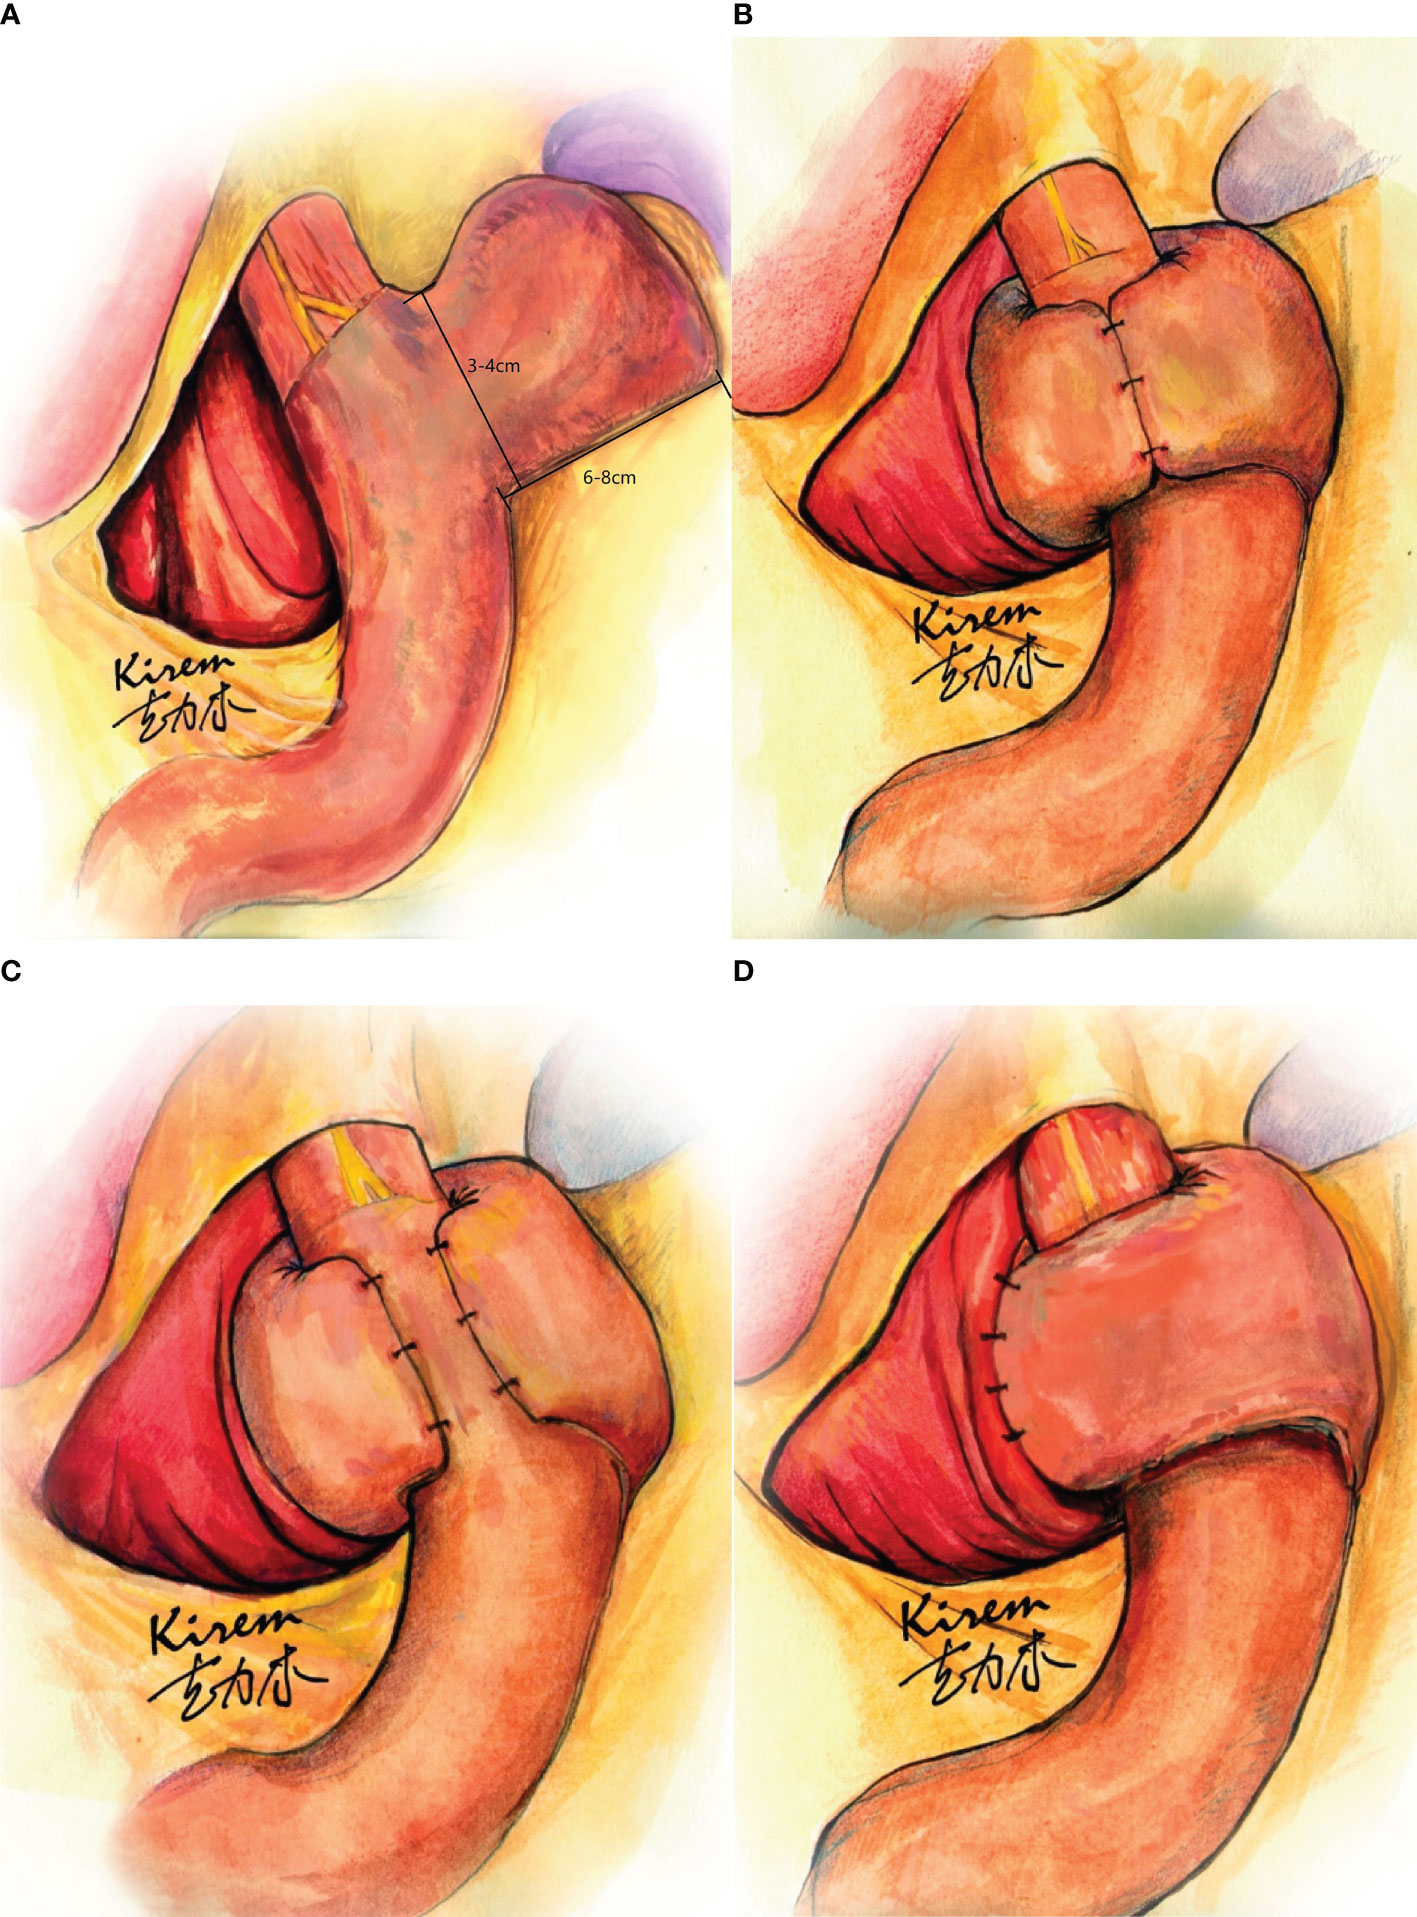 Reflux After Sleeve Gastrectomy - Bariatric Surgery